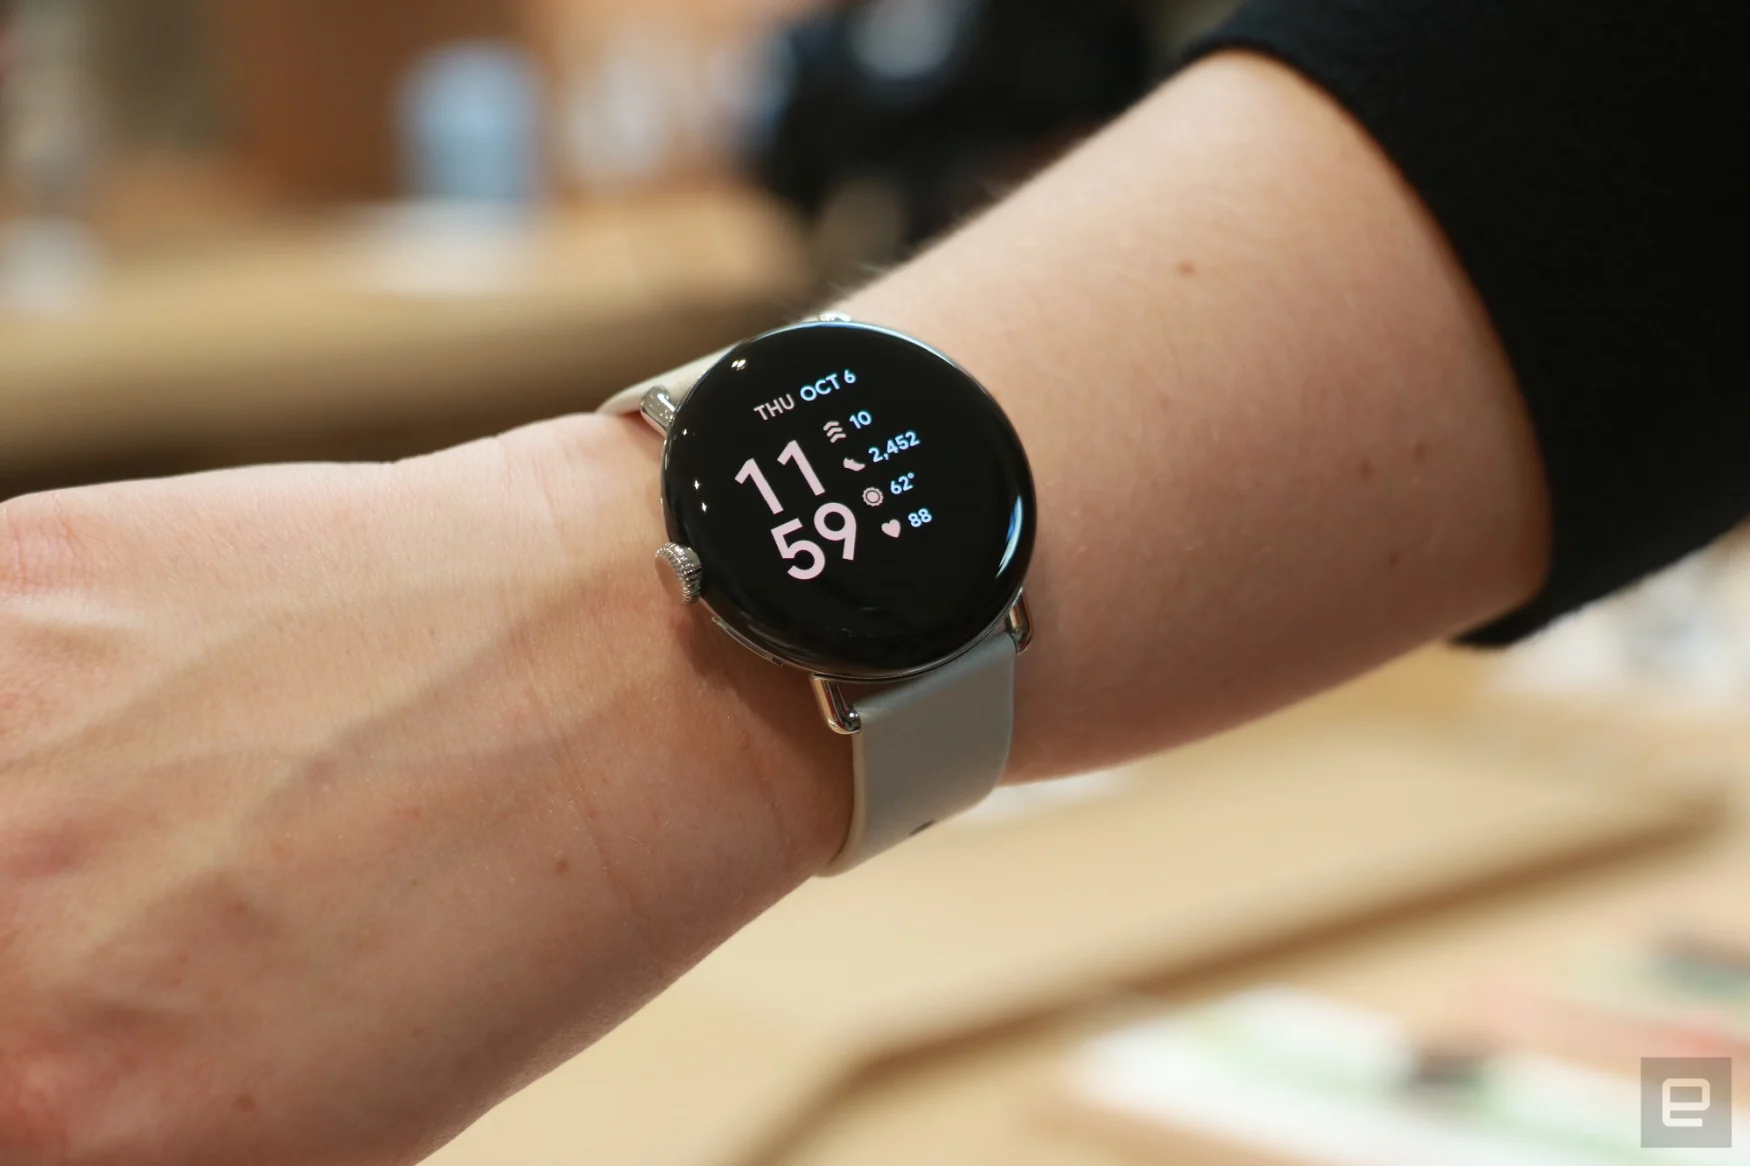 The Google Pixel Watch on a person's wrist.